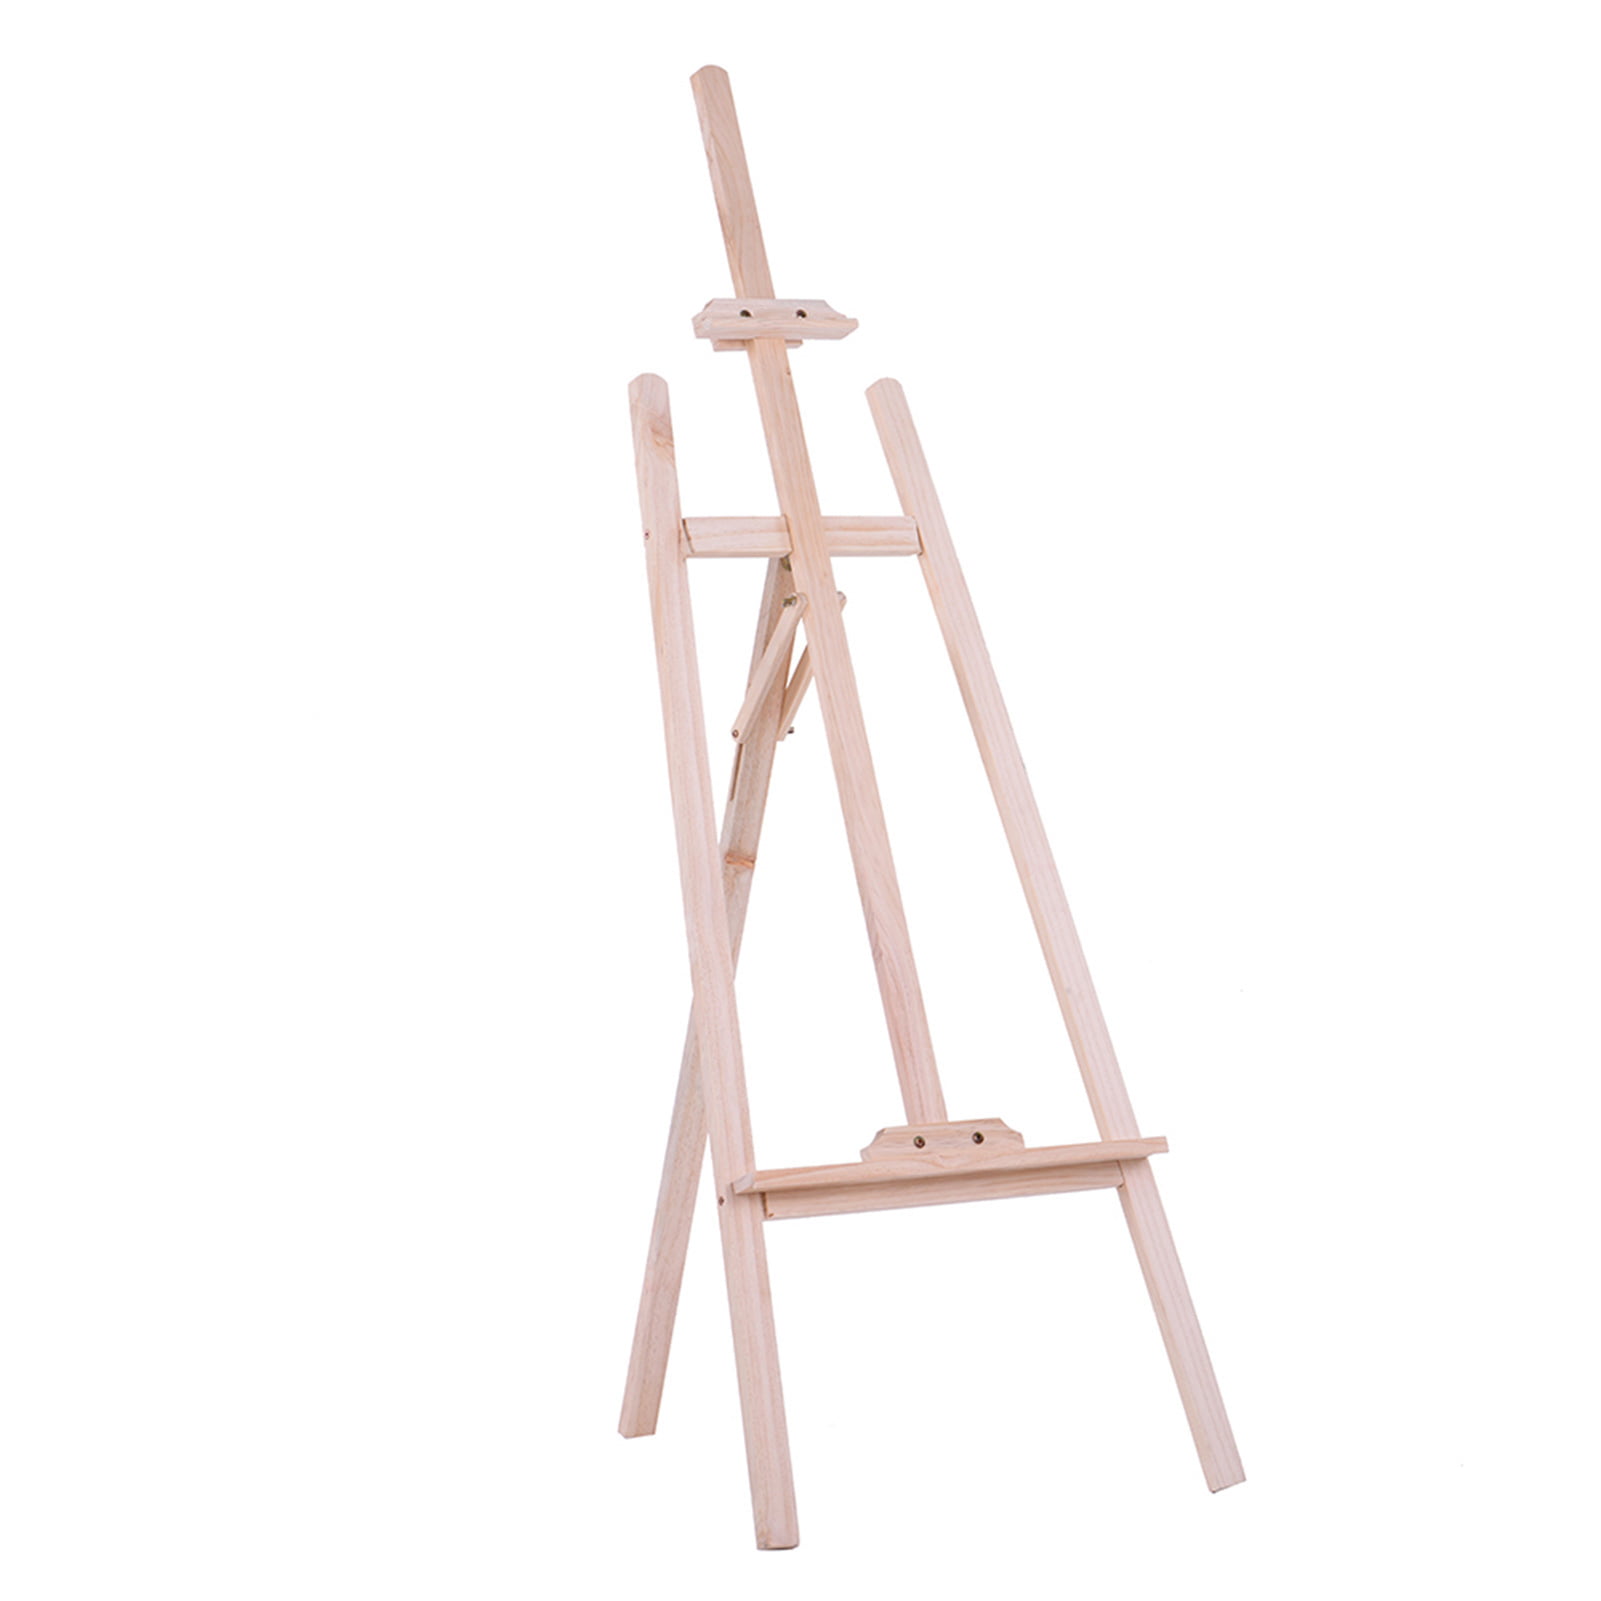 Painting Holder,Pine Wood 150cm/59 Inch Tall Adjustable Durable Art Artist Easel Sketch Drawing Stand Display Canvas Easel for Painting Sketching Display Exhibition Wedding 